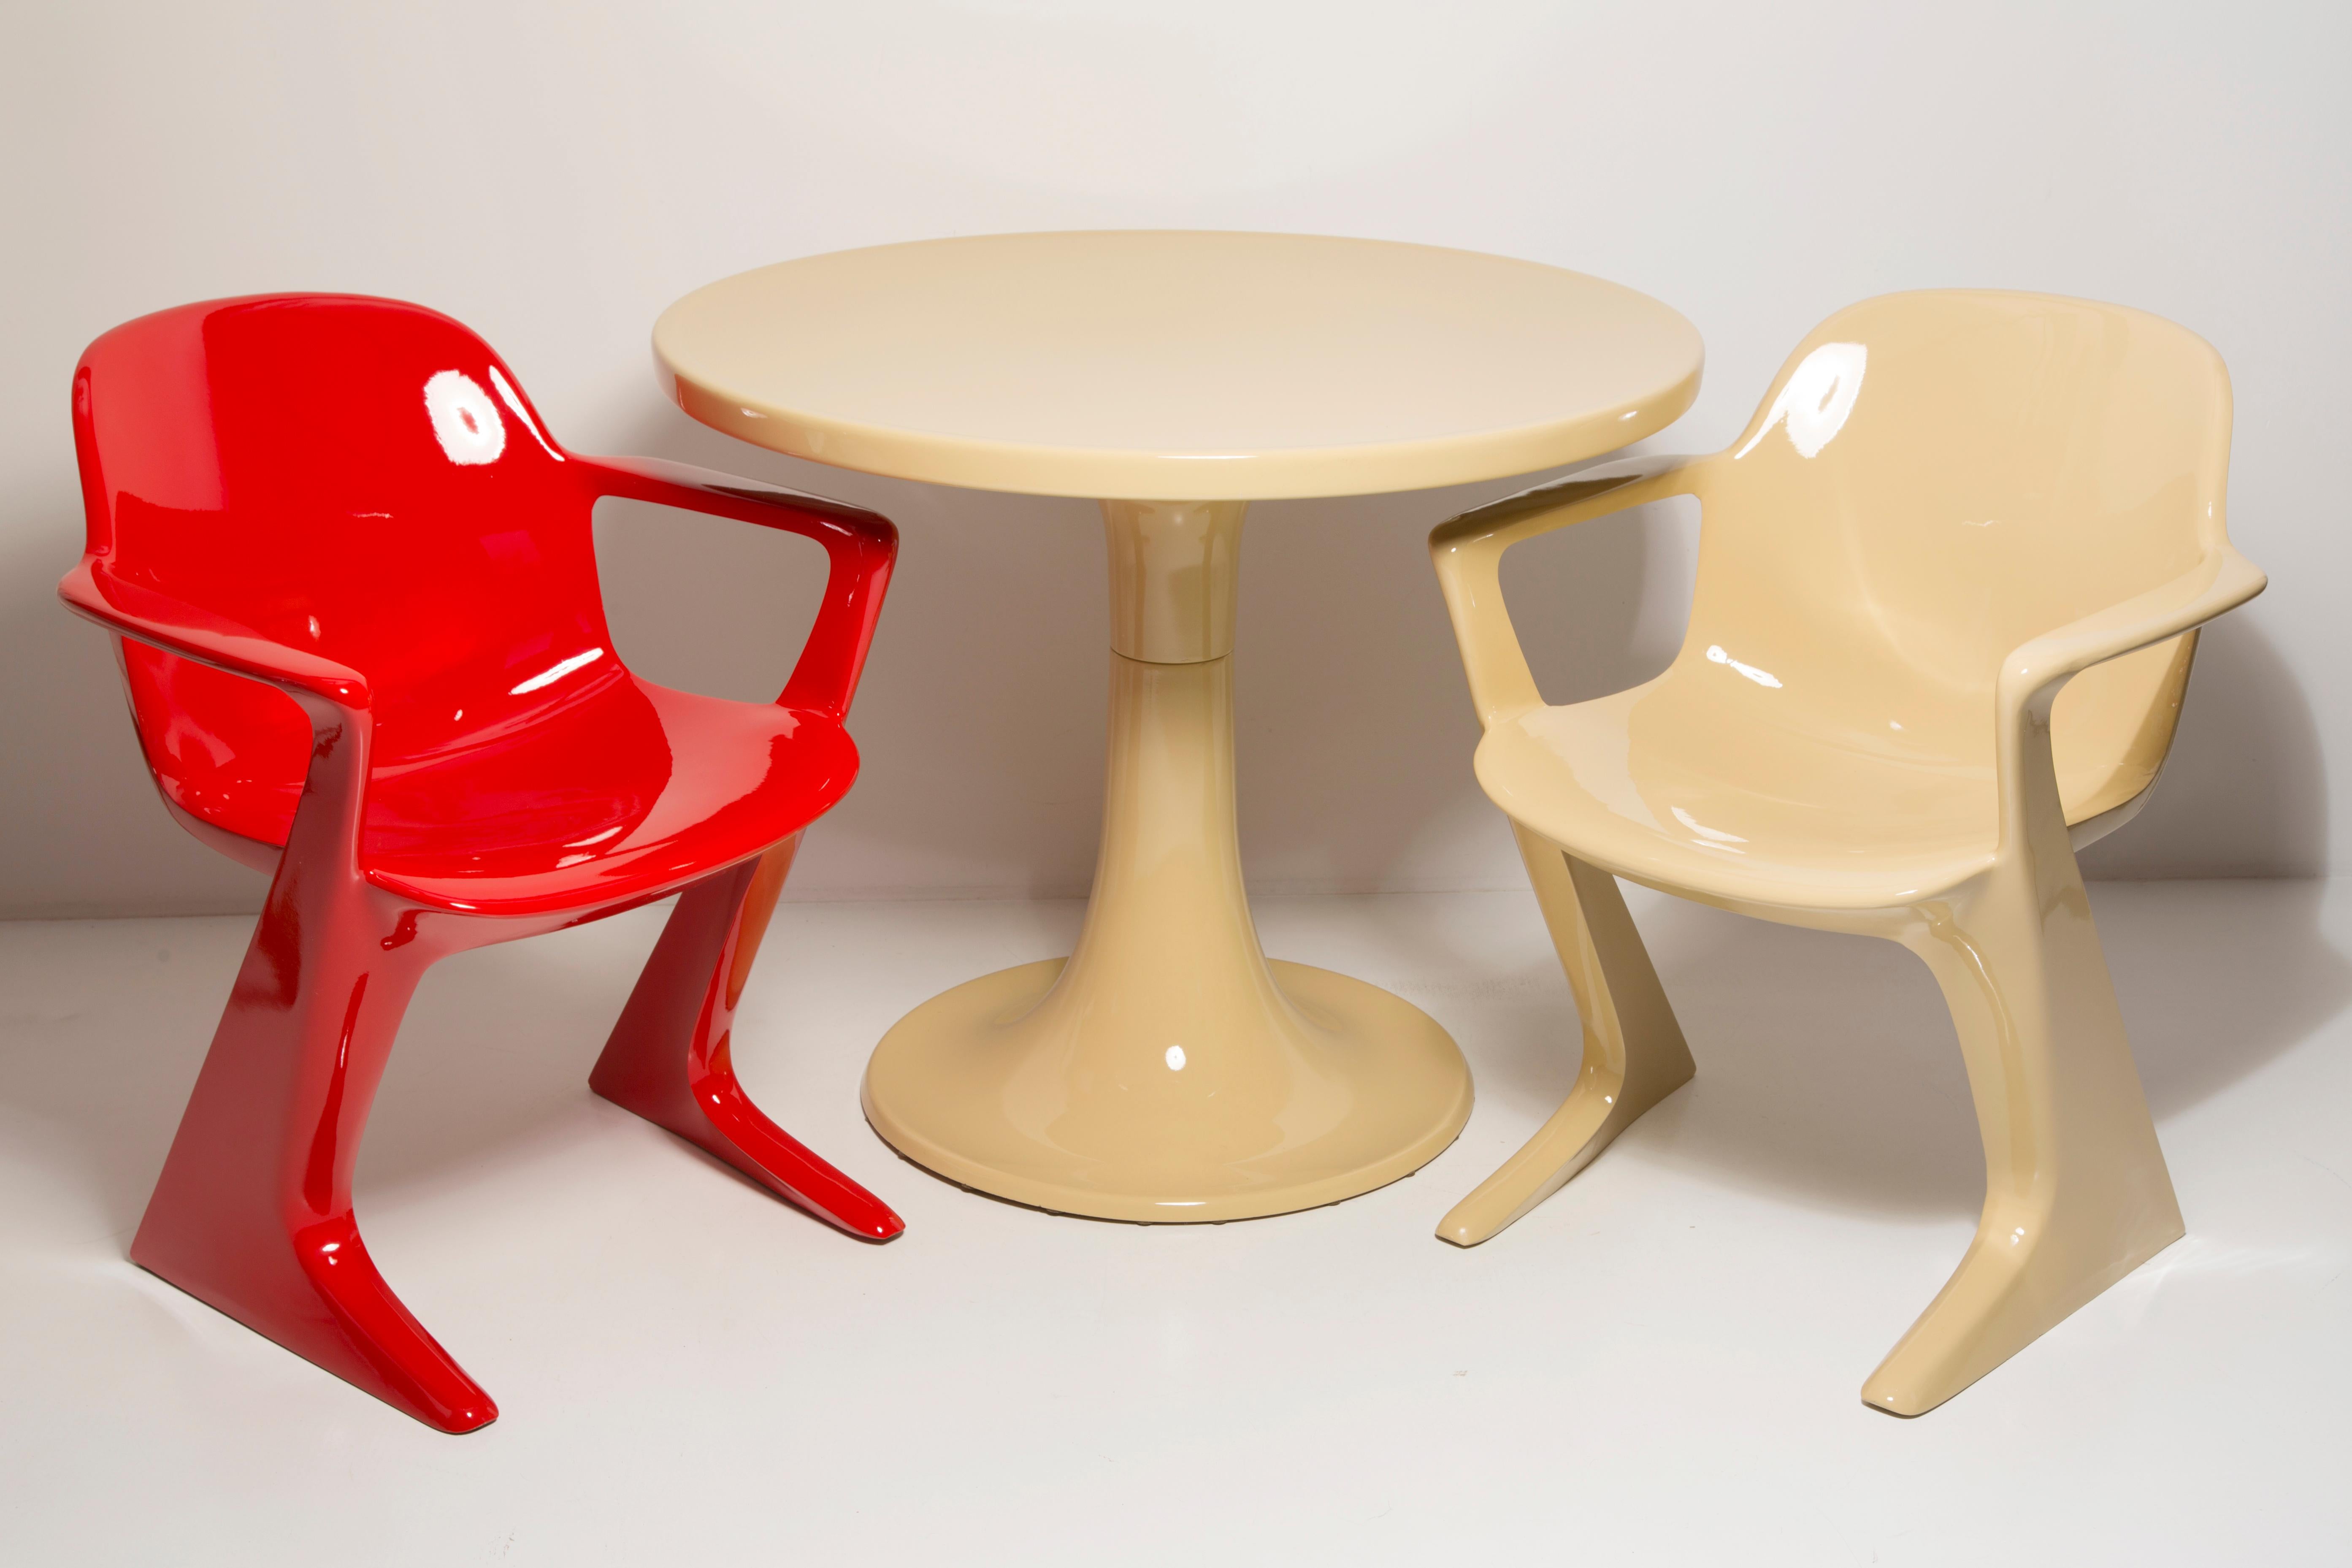 Midcentury Beige and Red Kangaroo Chairs and Table Ernst Moeckl, Germany, 1968 For Sale 1